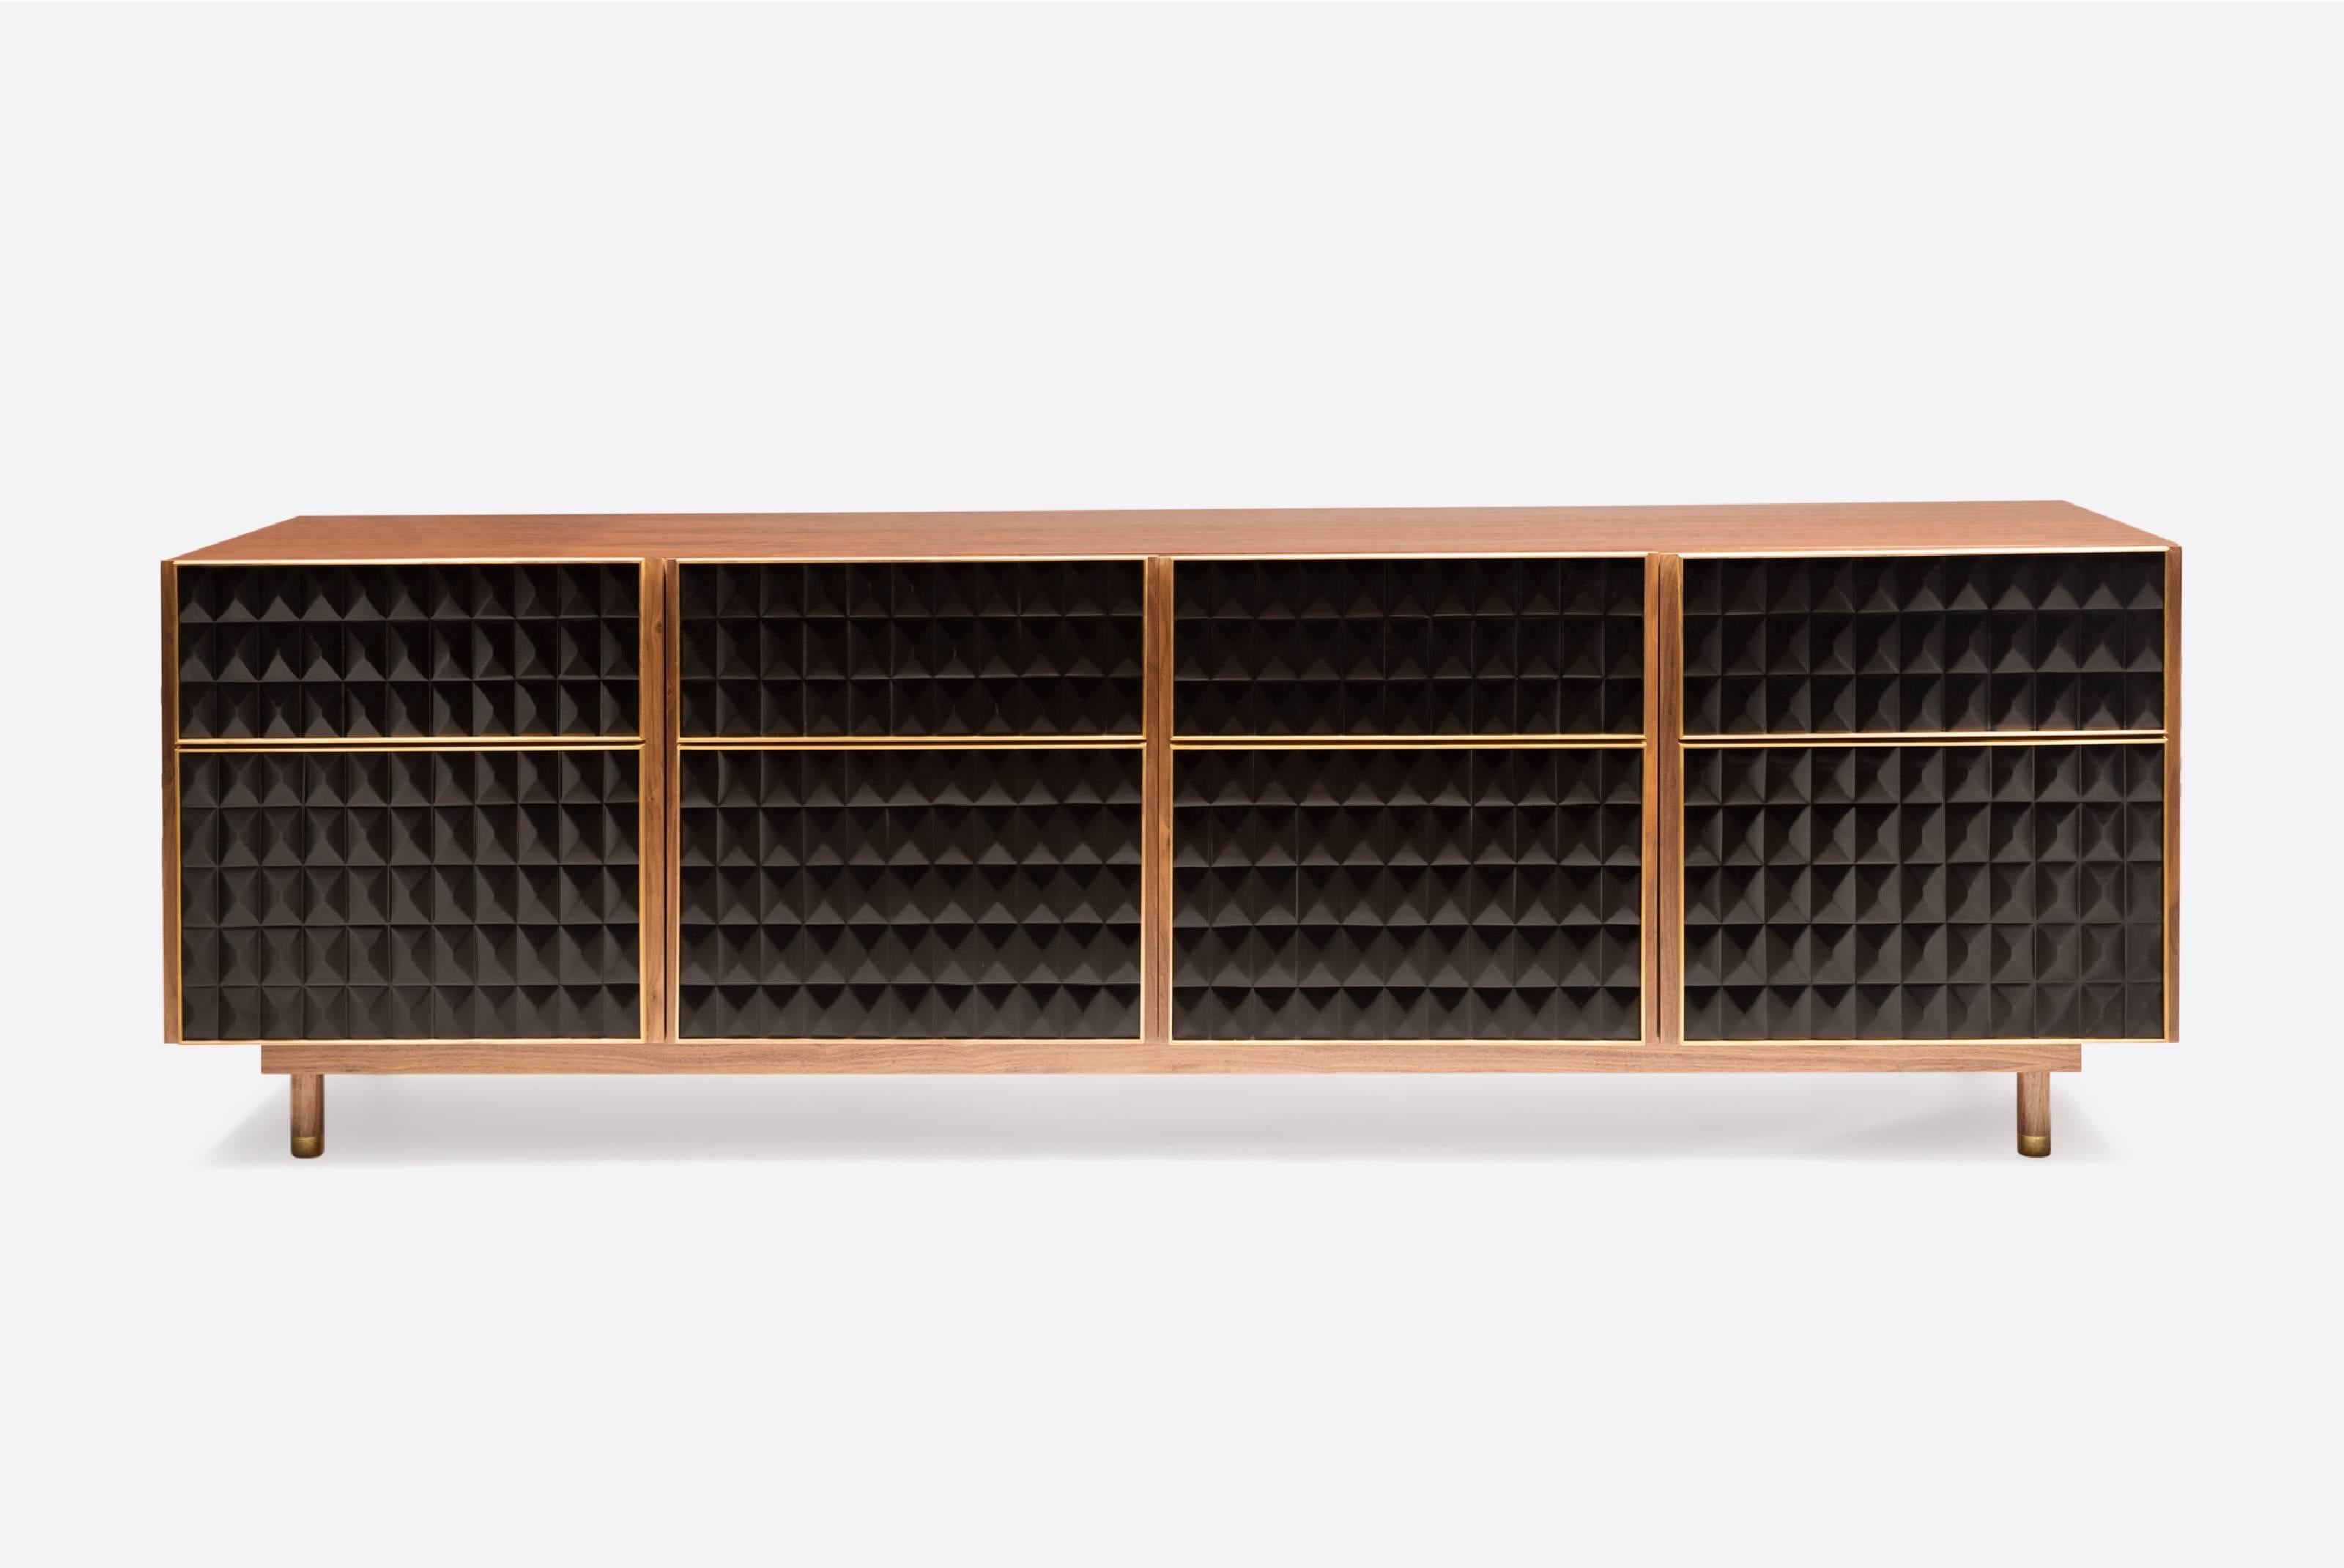 A collection of sideboards and cabinets inspired in the mix of materials used in the, 1950s architecture, from doors to facades of large buildings. The use of clean lines, geometric figures and characteristic patterns from that era. Created with